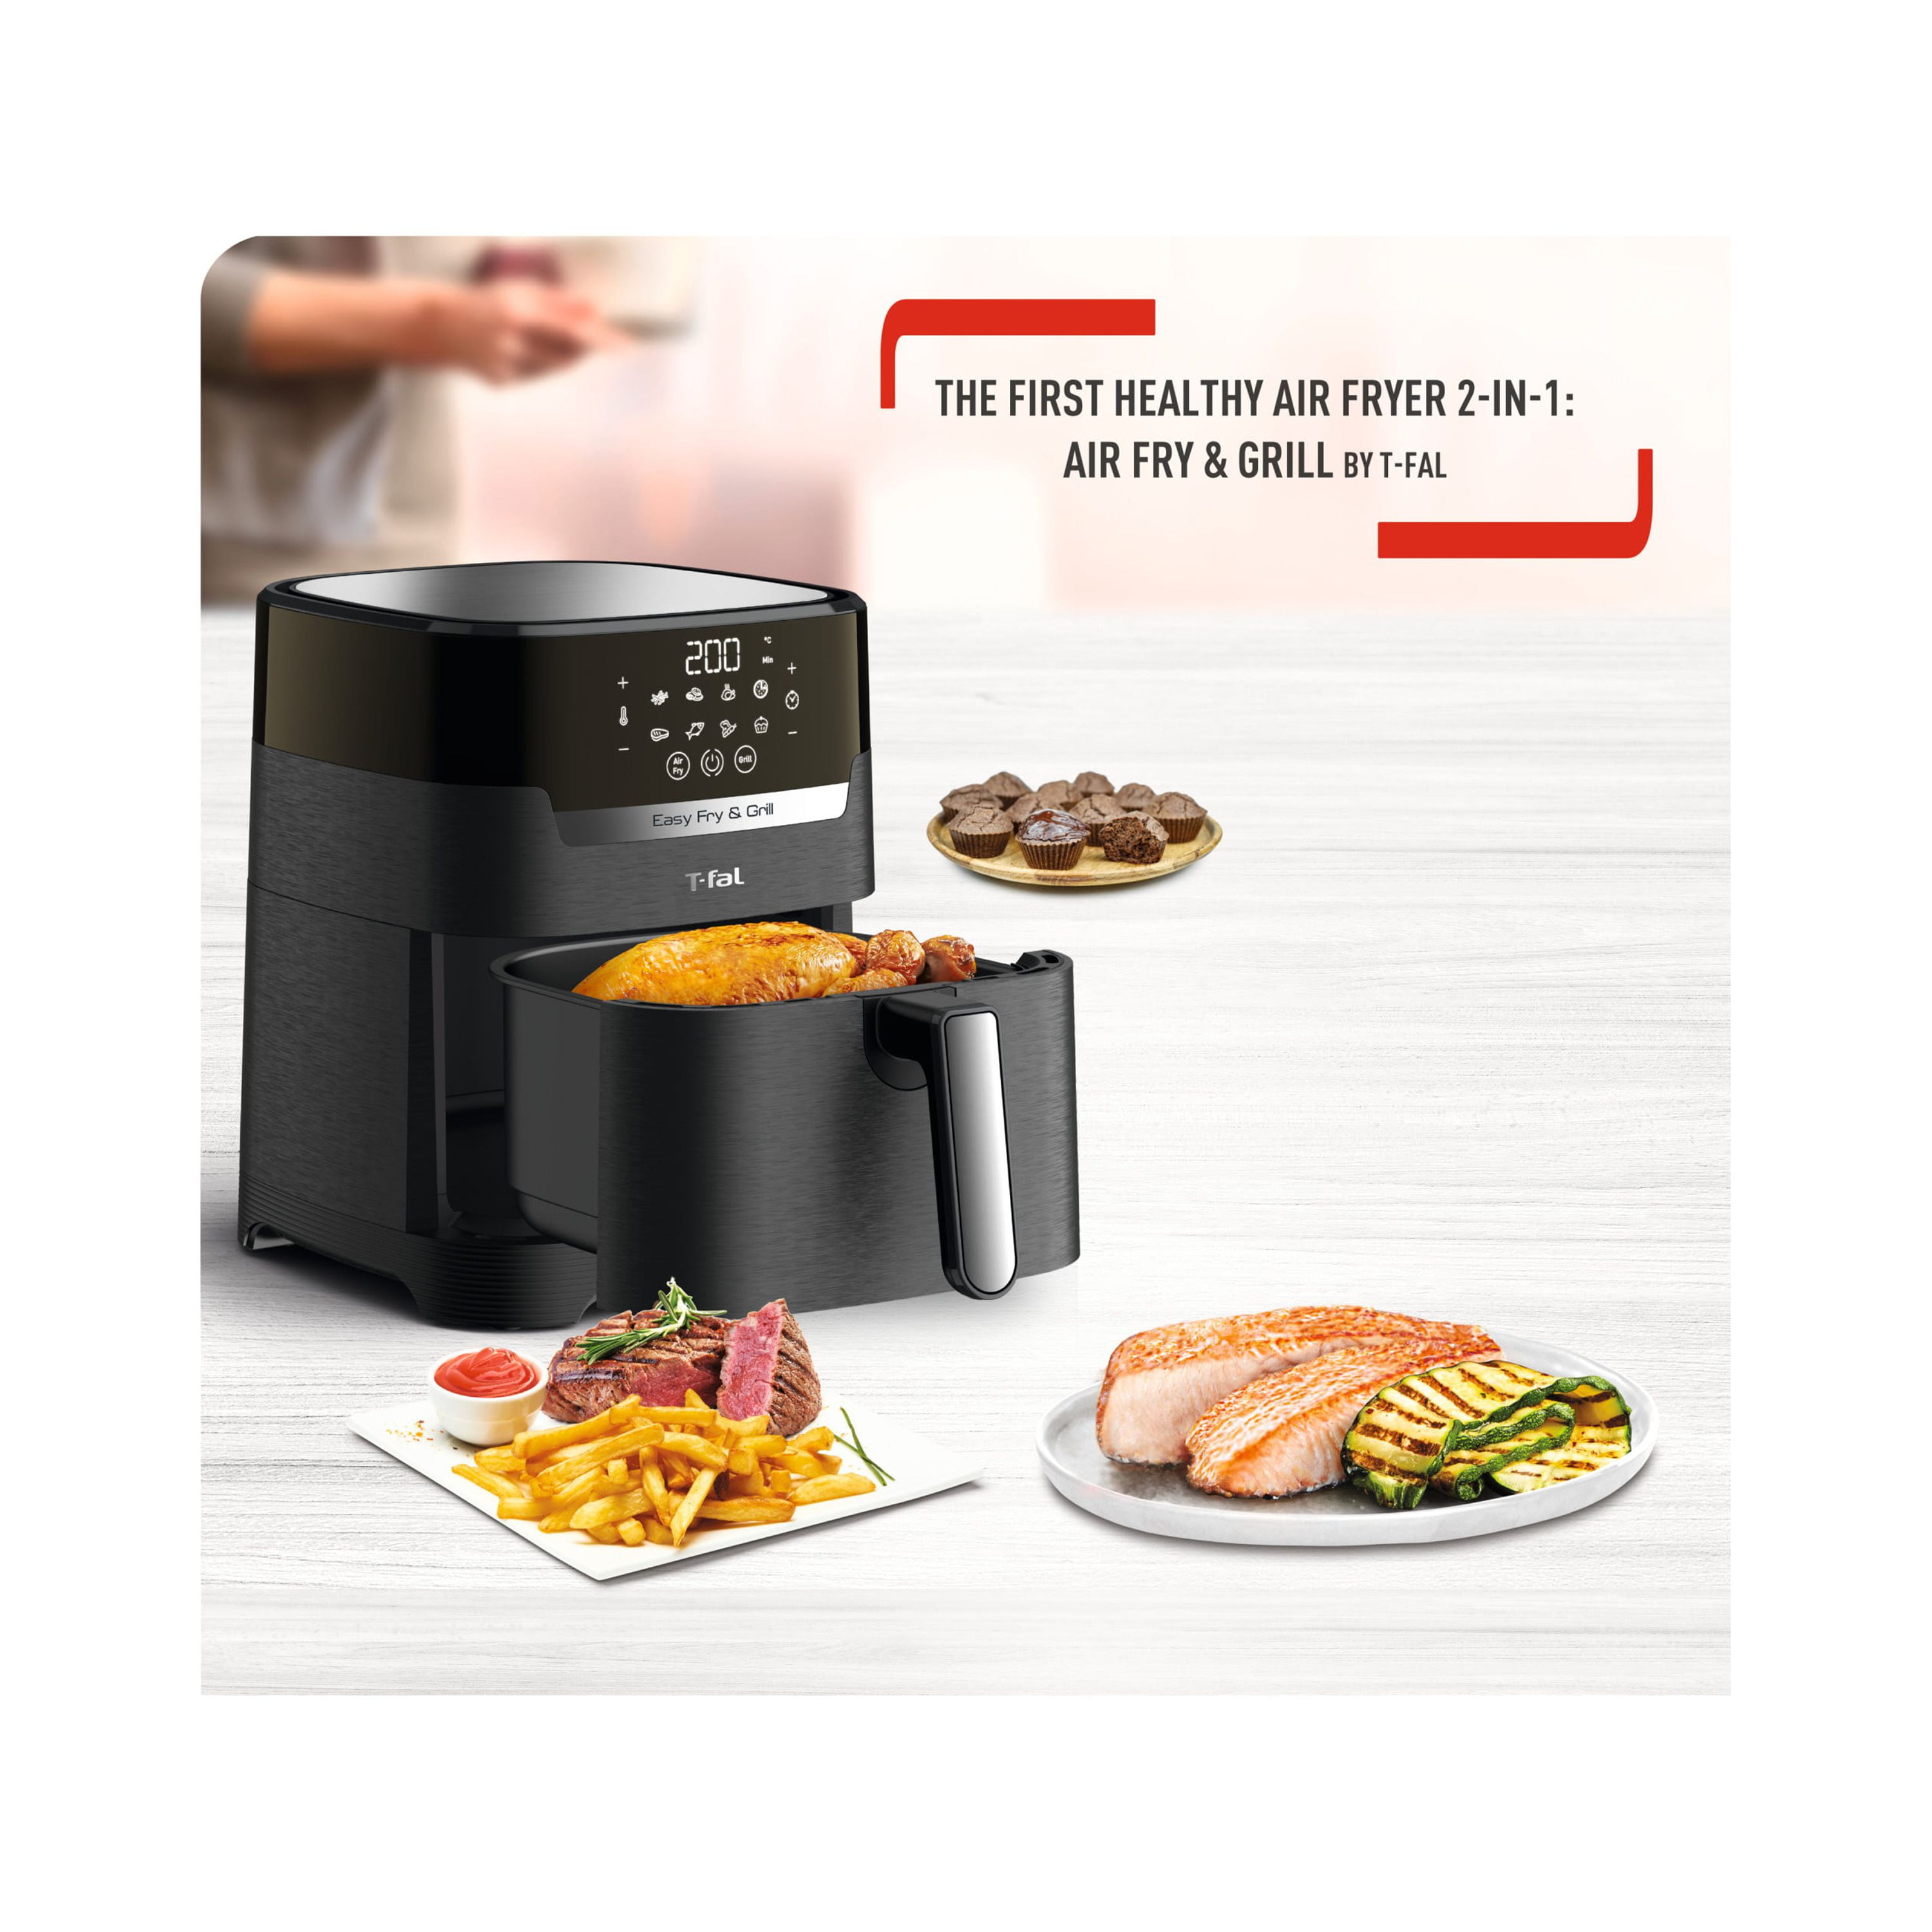 Tefal Easy Fry 2-in-1 Fry & Grill Classic Air Fryer & Health Grill, Black